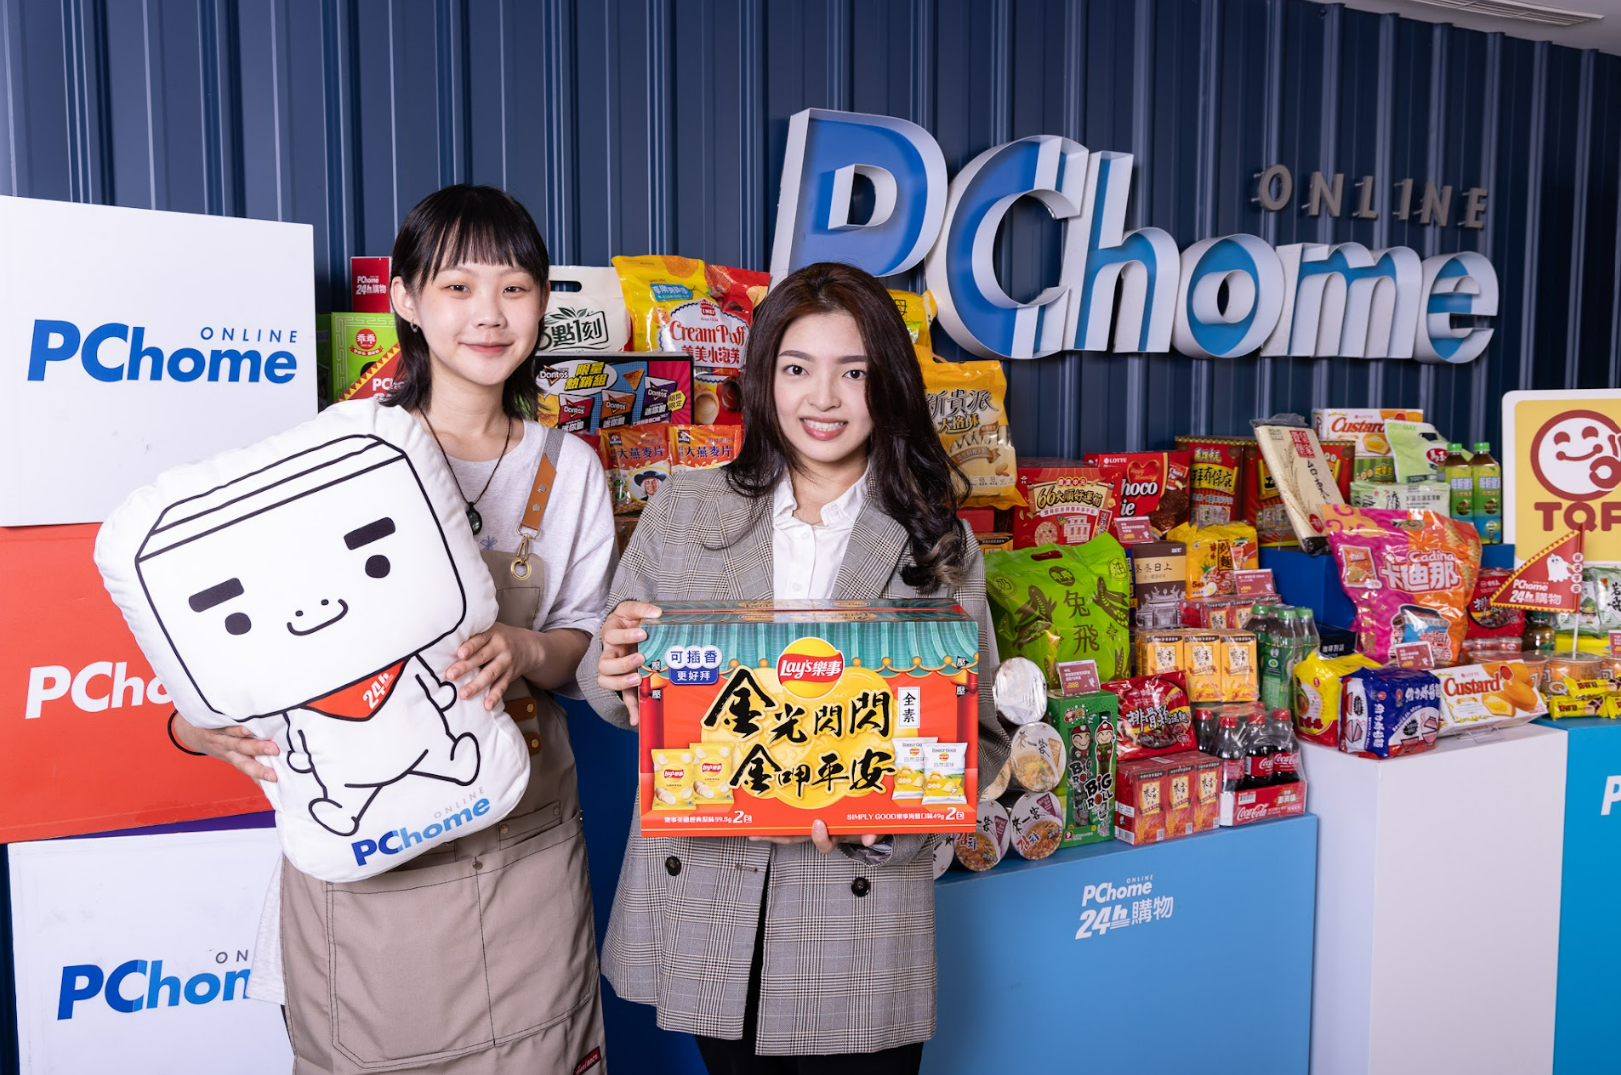 PChome 24h Shopping Reveals Top 10 Best-Selling Chungyuan and Targets a 25% Annual Increase on Chungyuan Food Sales